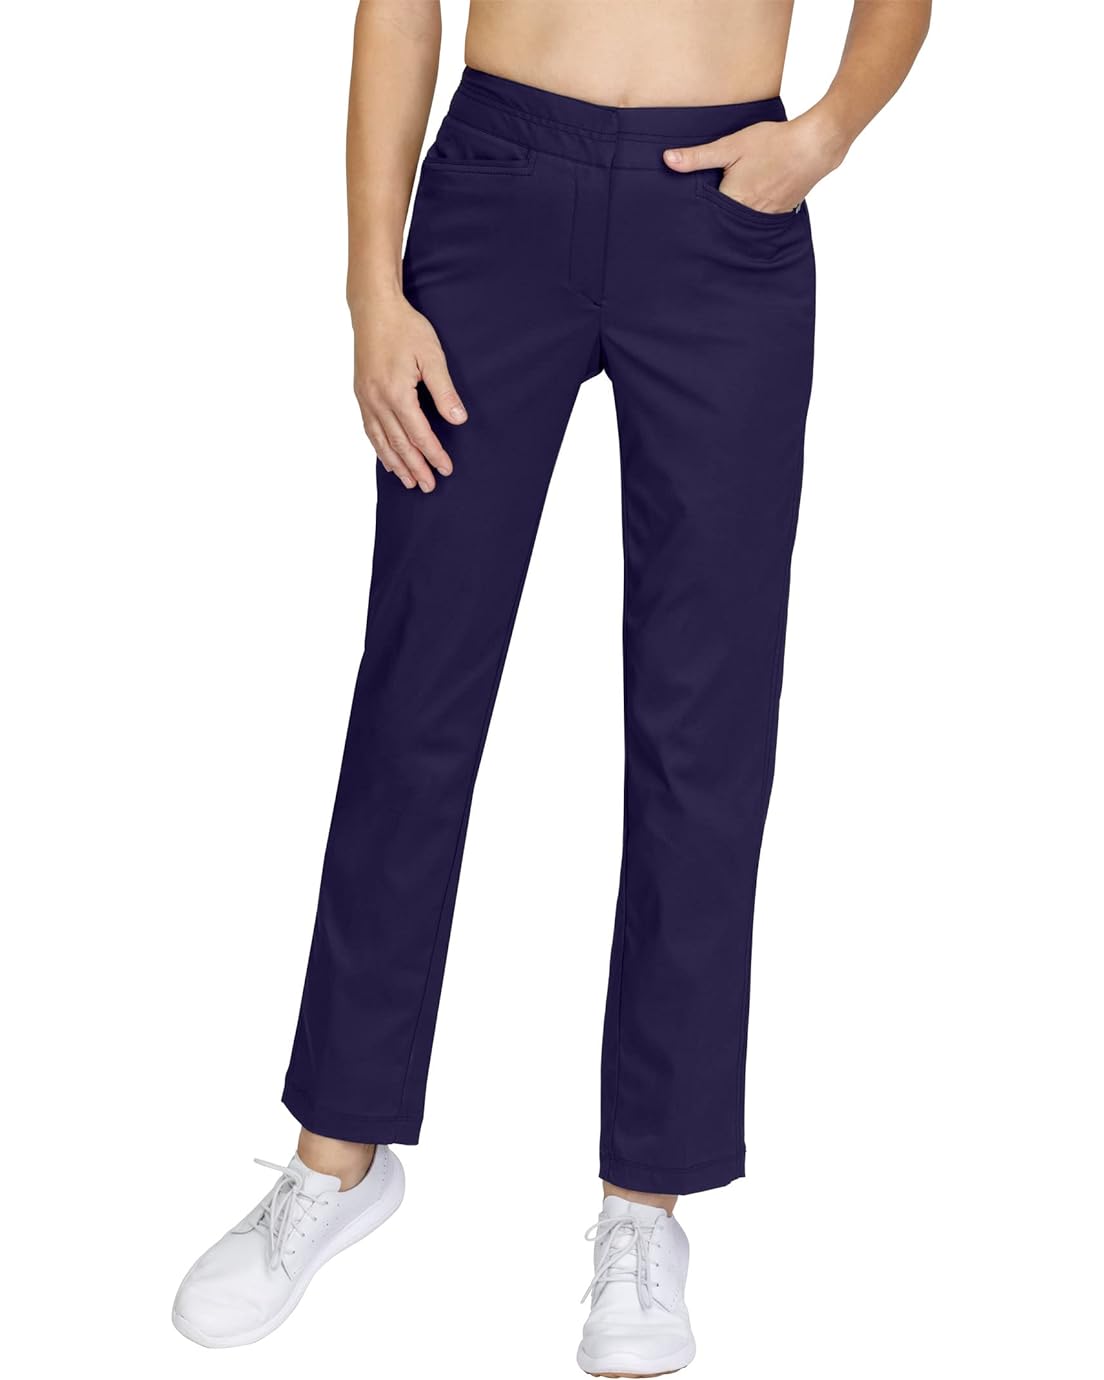 Tail Activewear Classic Pants